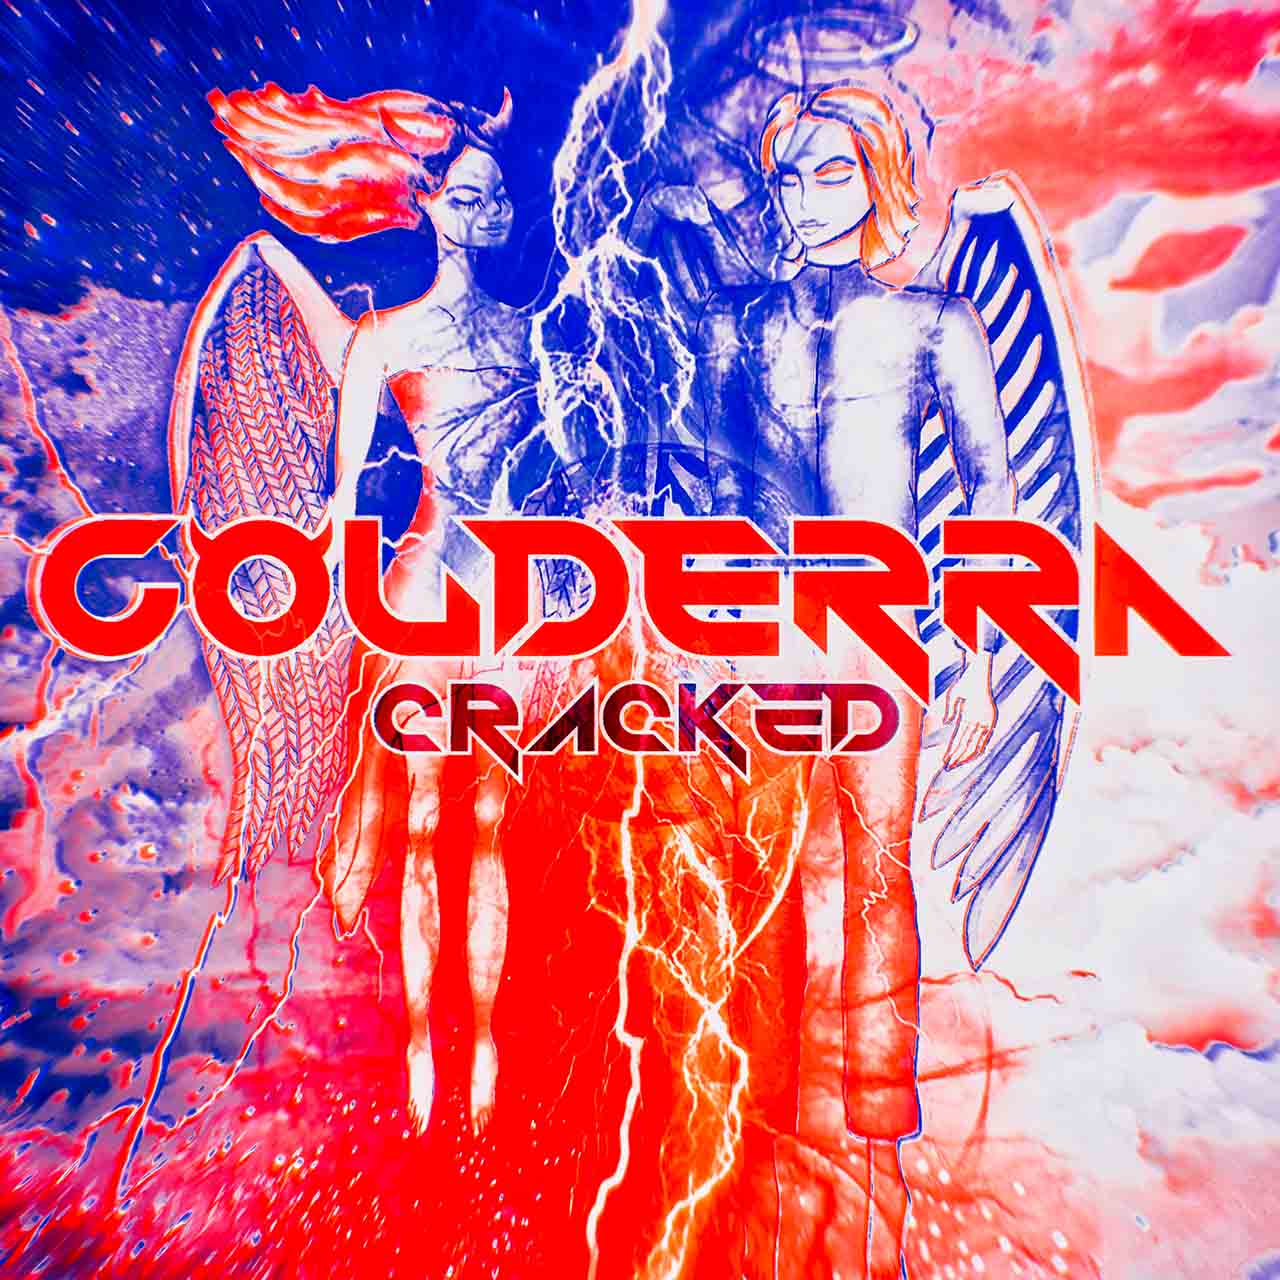 COLDERRA - Cracked cover 